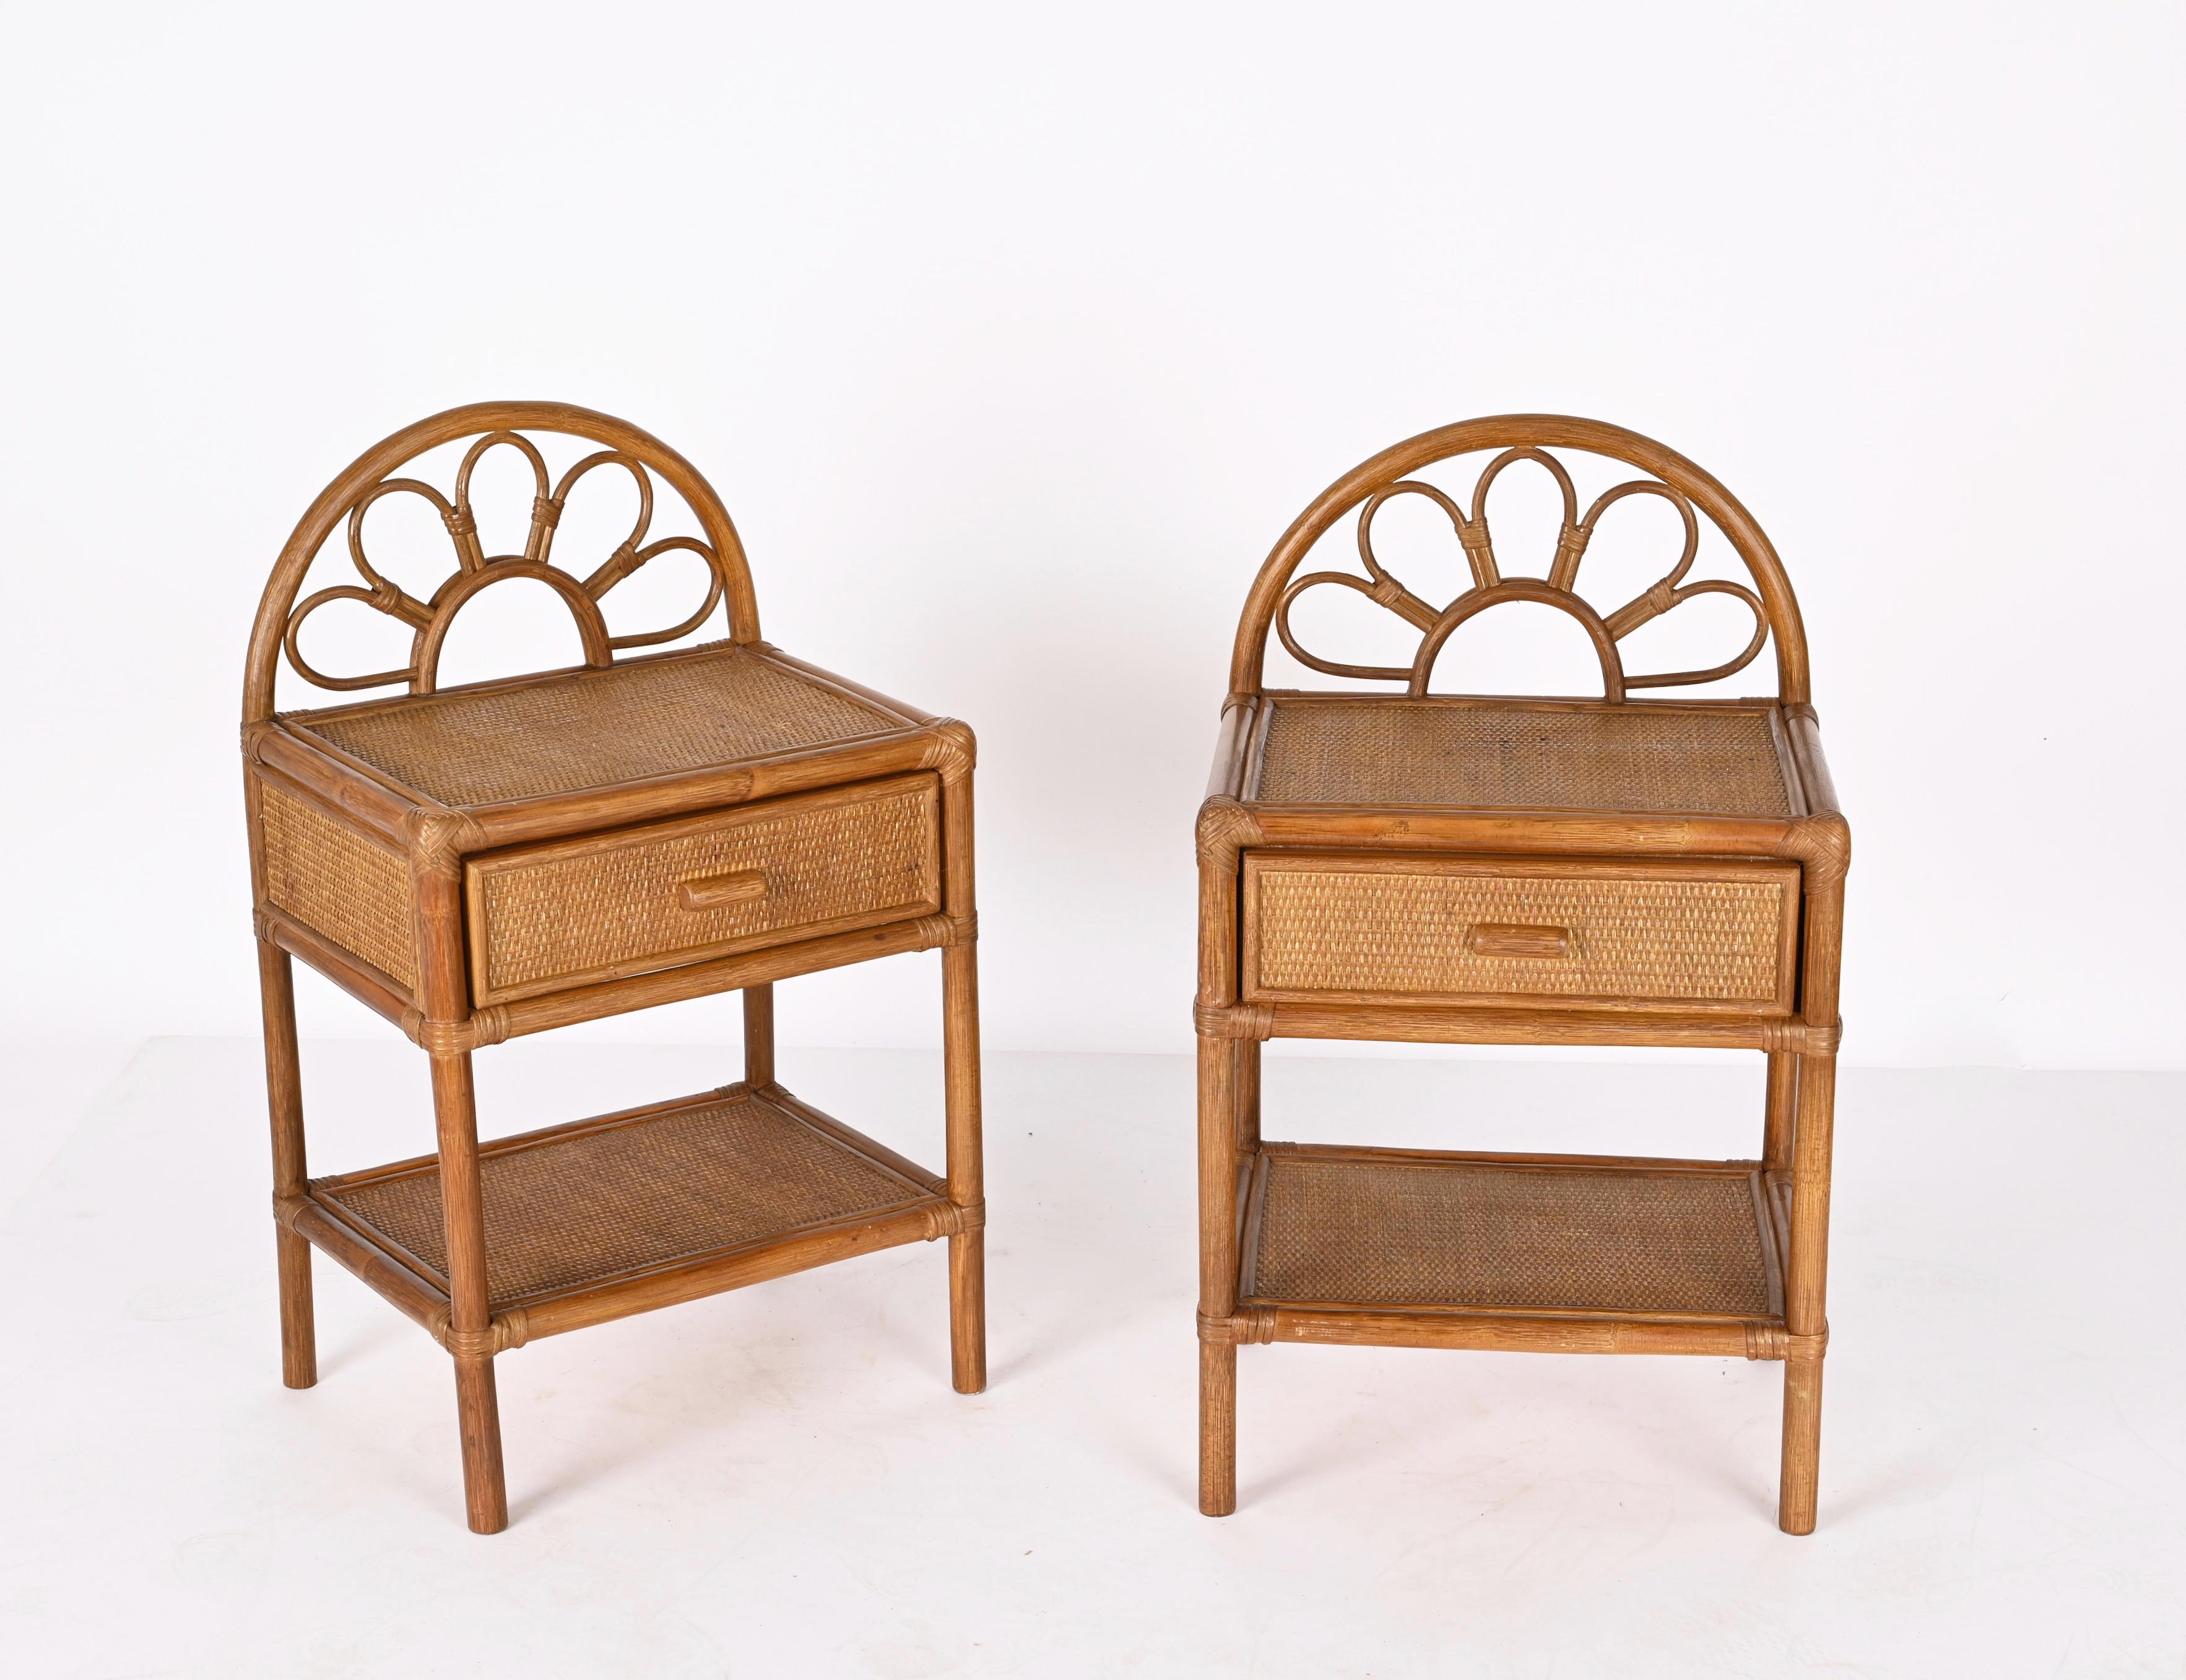 Pair of Mid-Century Modern Bamboo Cane and Rattan Italian Bedside Tables, 1970s 13